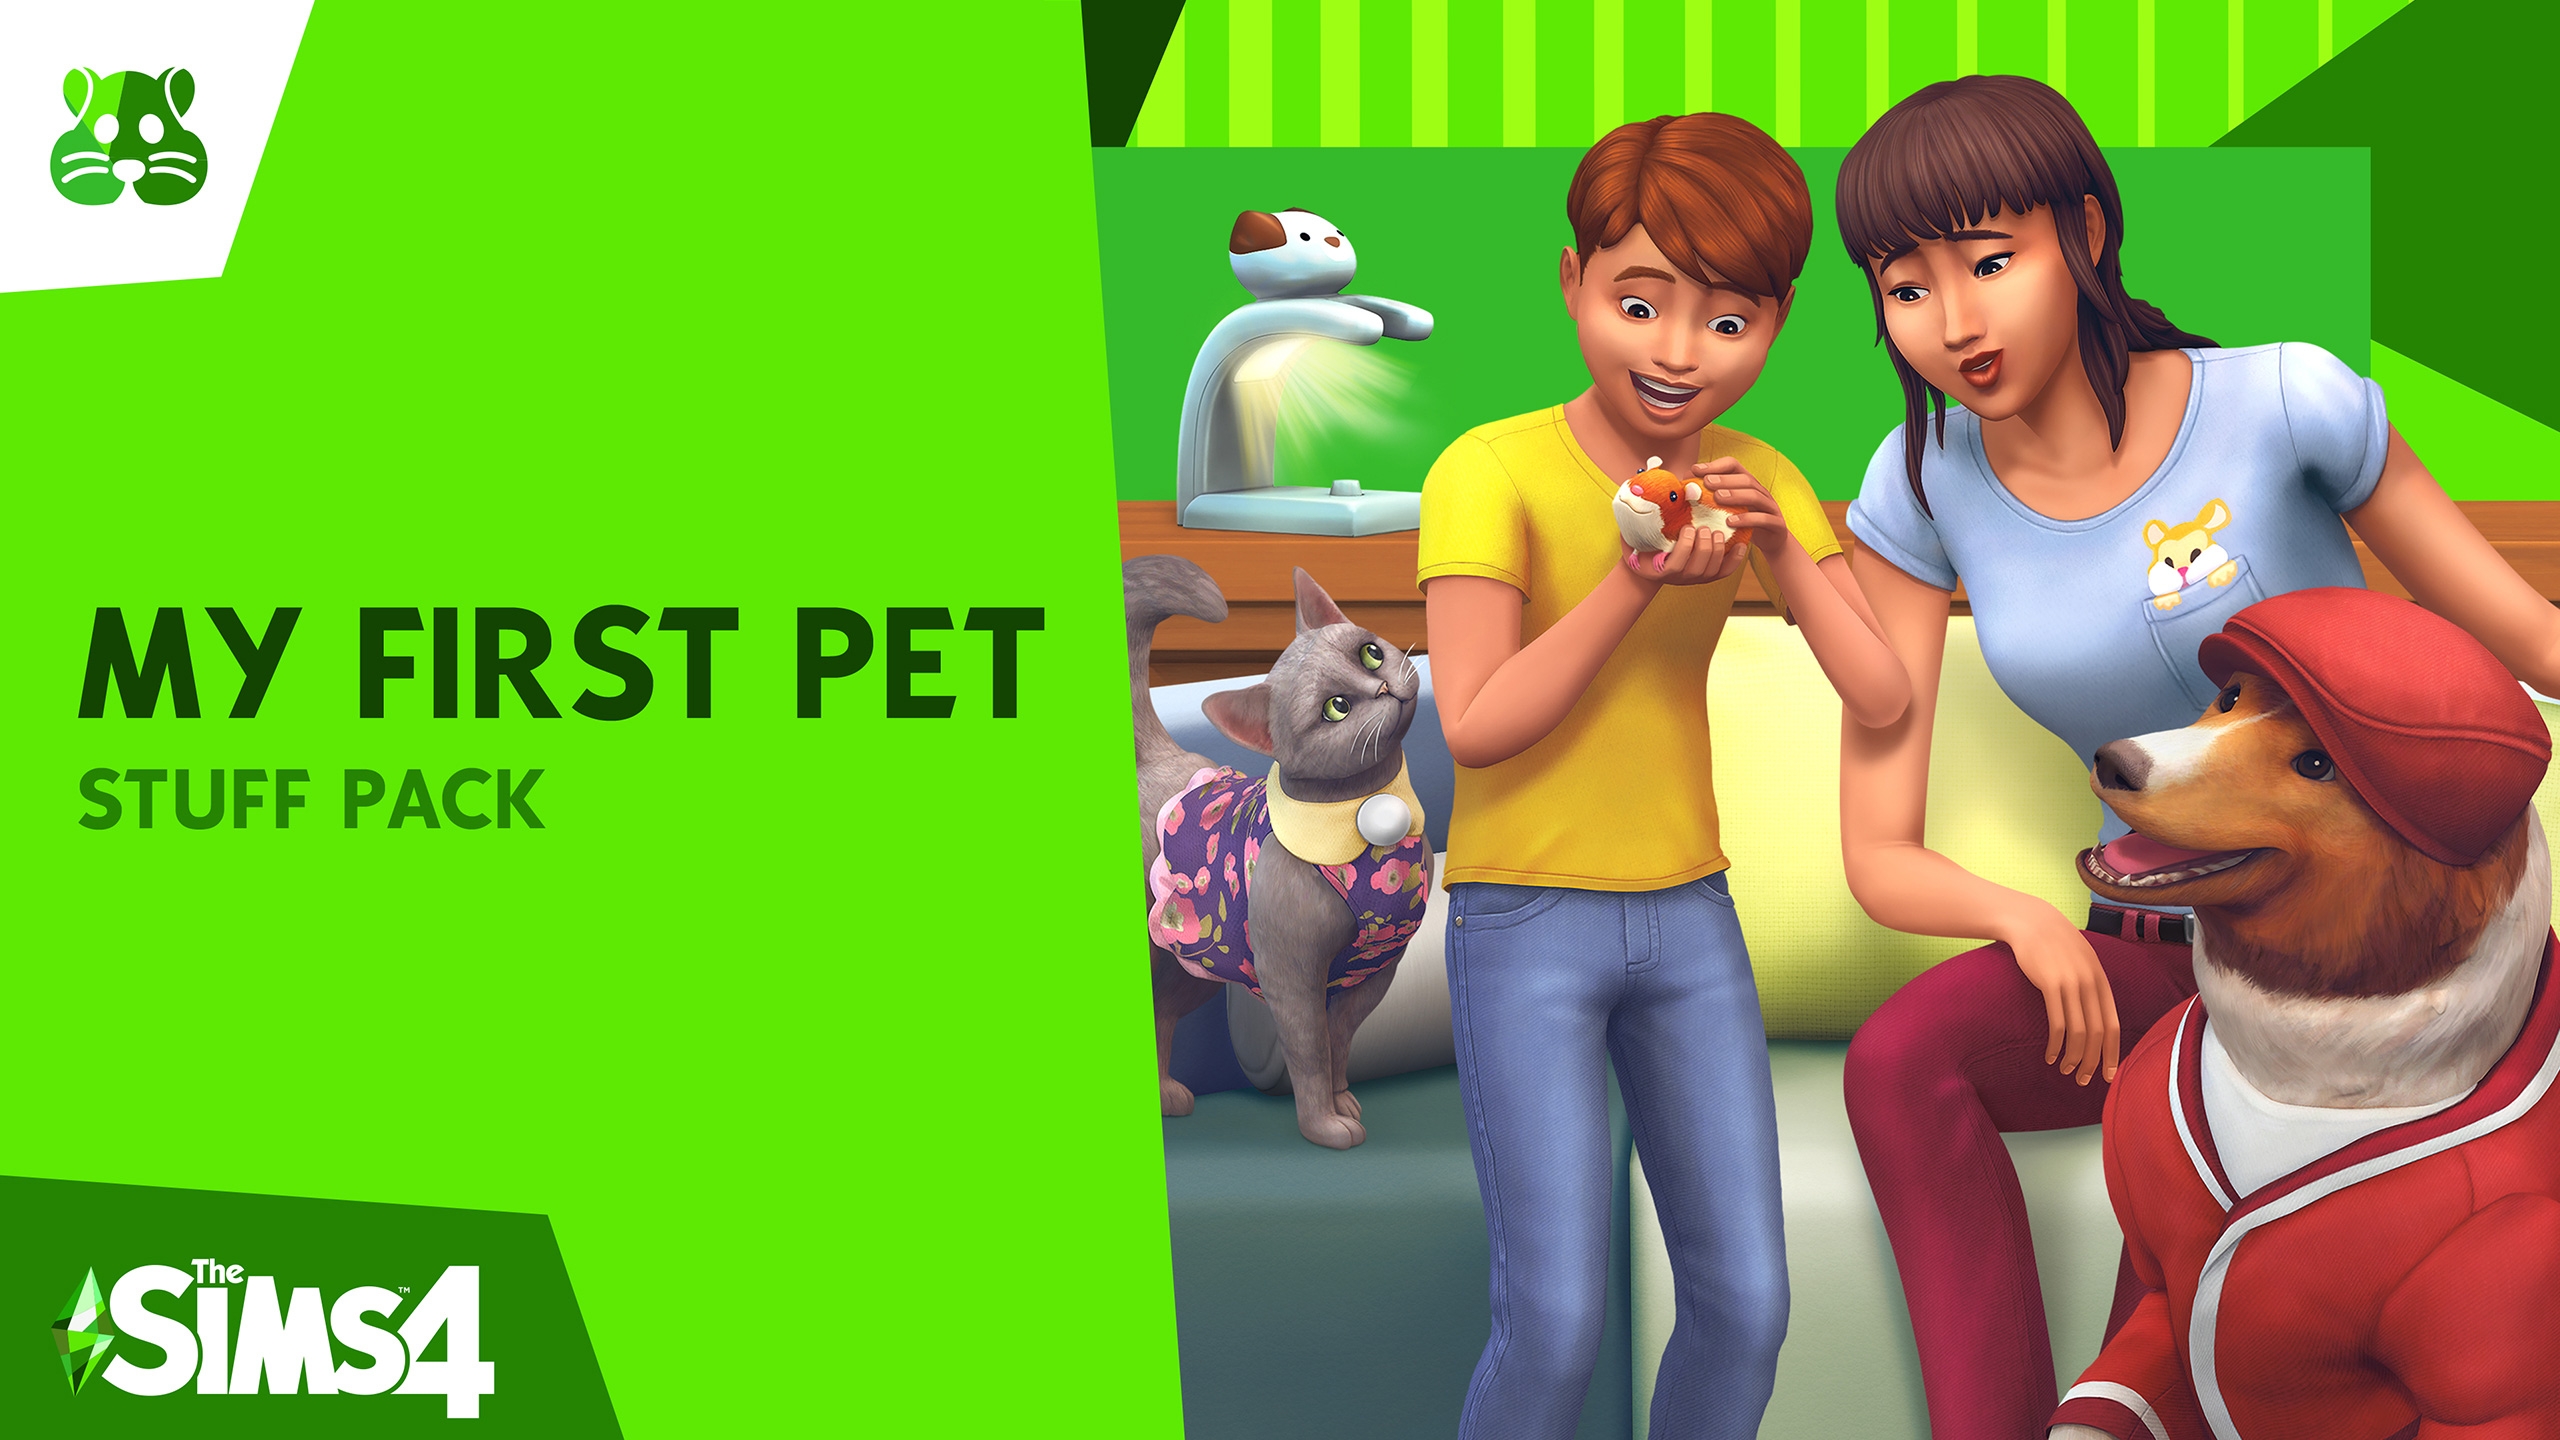 https://gaming-cdn.com/images/products/2642/orig/the-sims-4-my-first-pet-stuff-pc-mac-game-ea-app-cover.jpg?v=1686146559